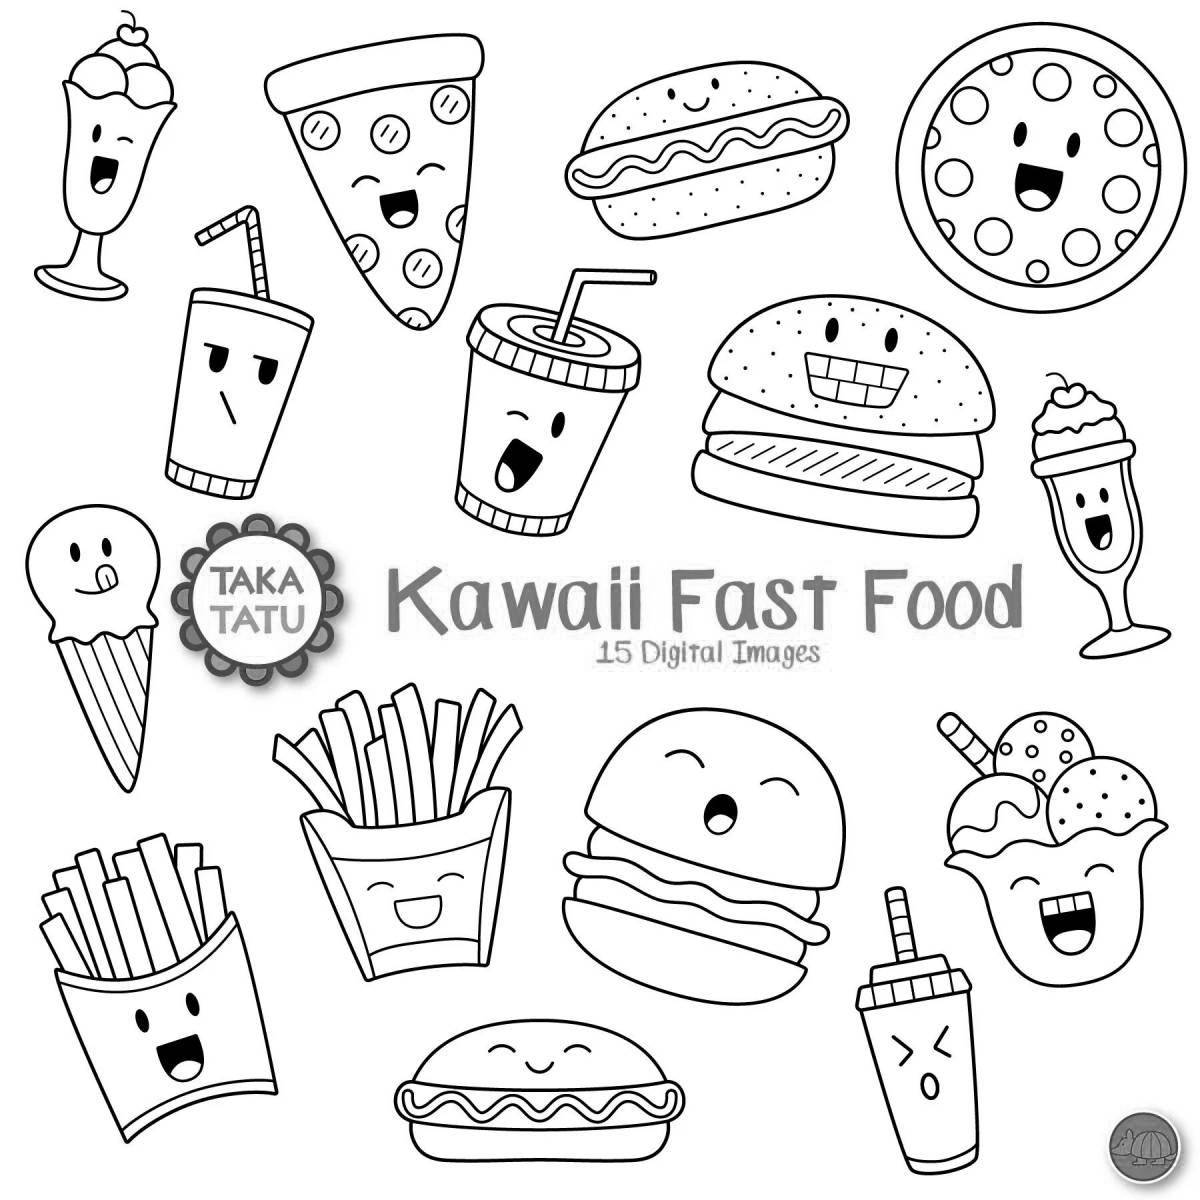 Fun coloring pages with food stickers